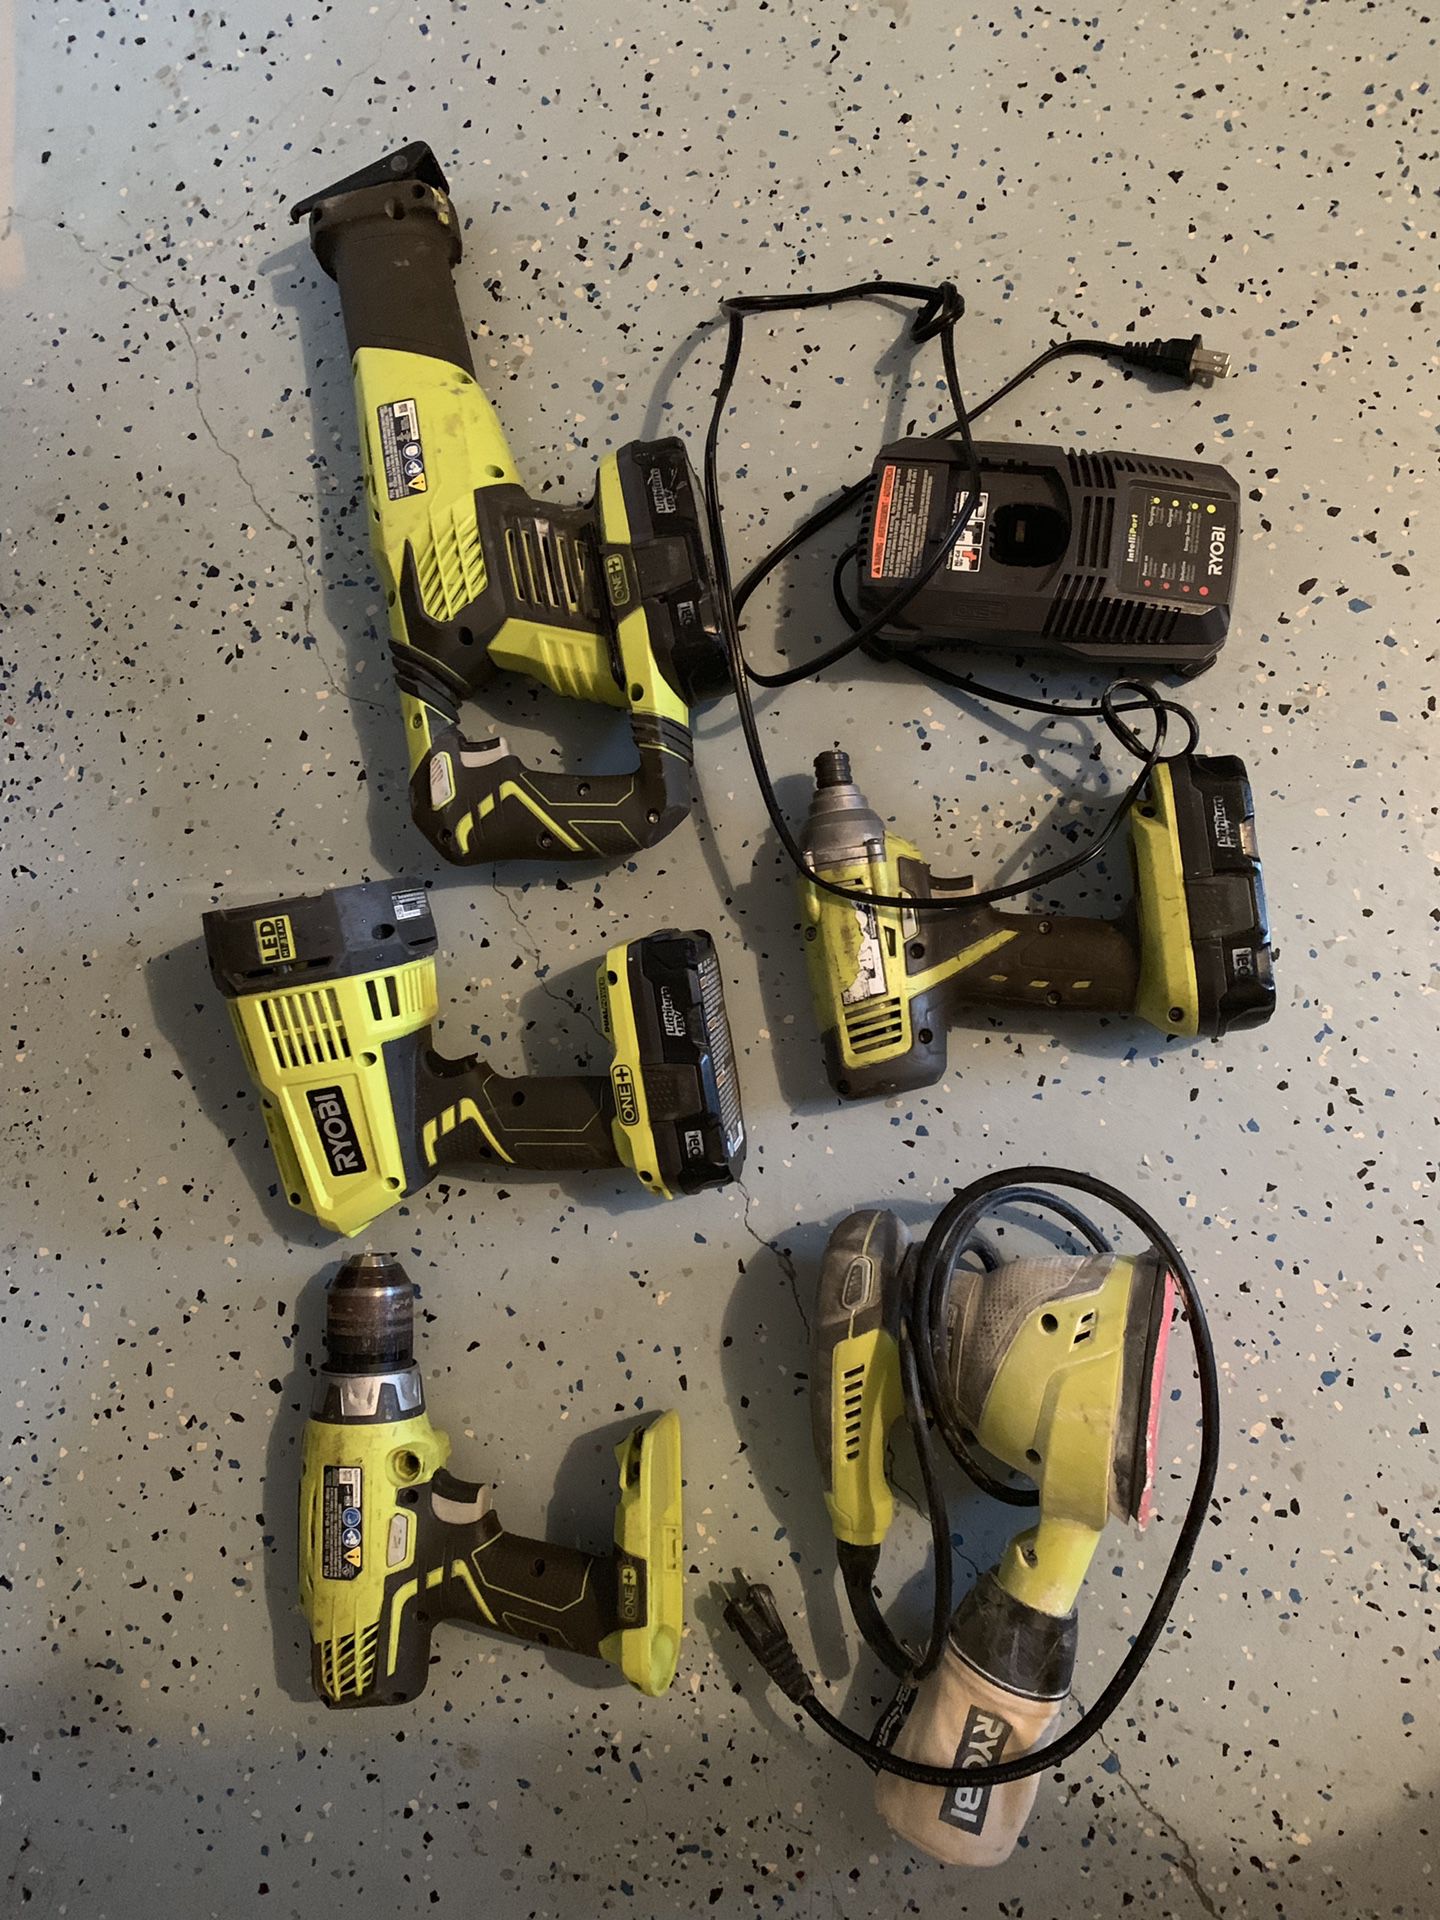 Set off rioby tools ( drill driver, impact driver, flash light, finish sander with power cord ,reciprocating saw, 3 batteries and charger..)